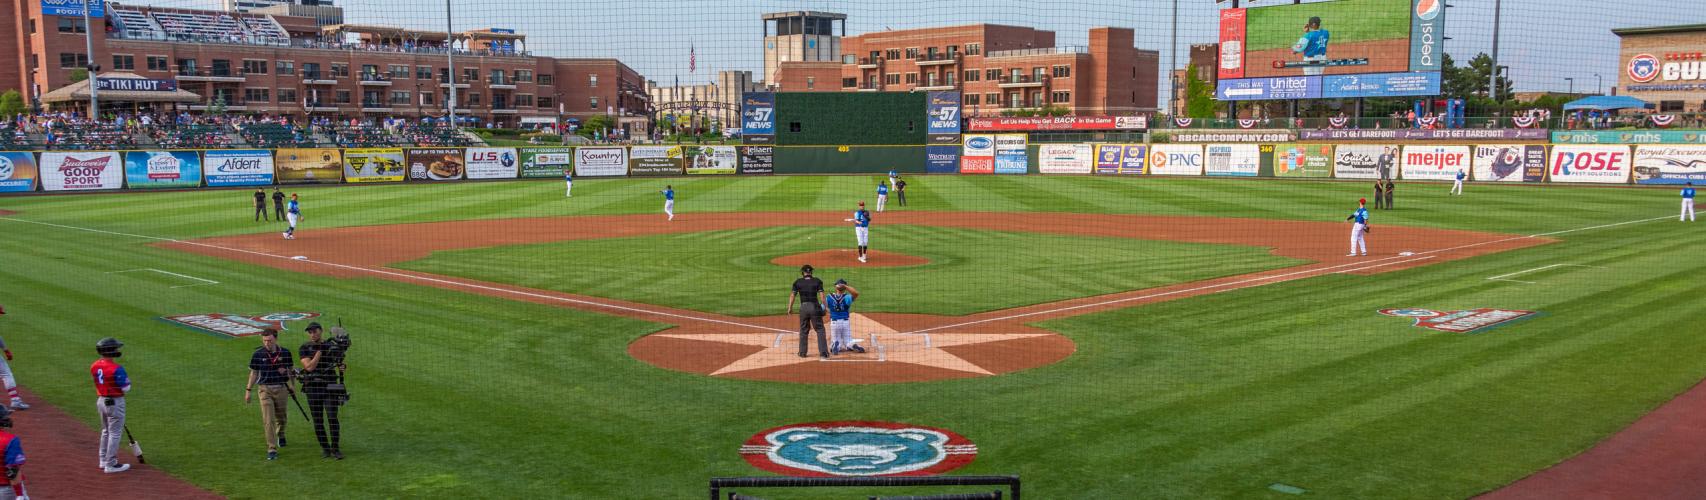 The Cubs will host two exhibition games at the South Bend